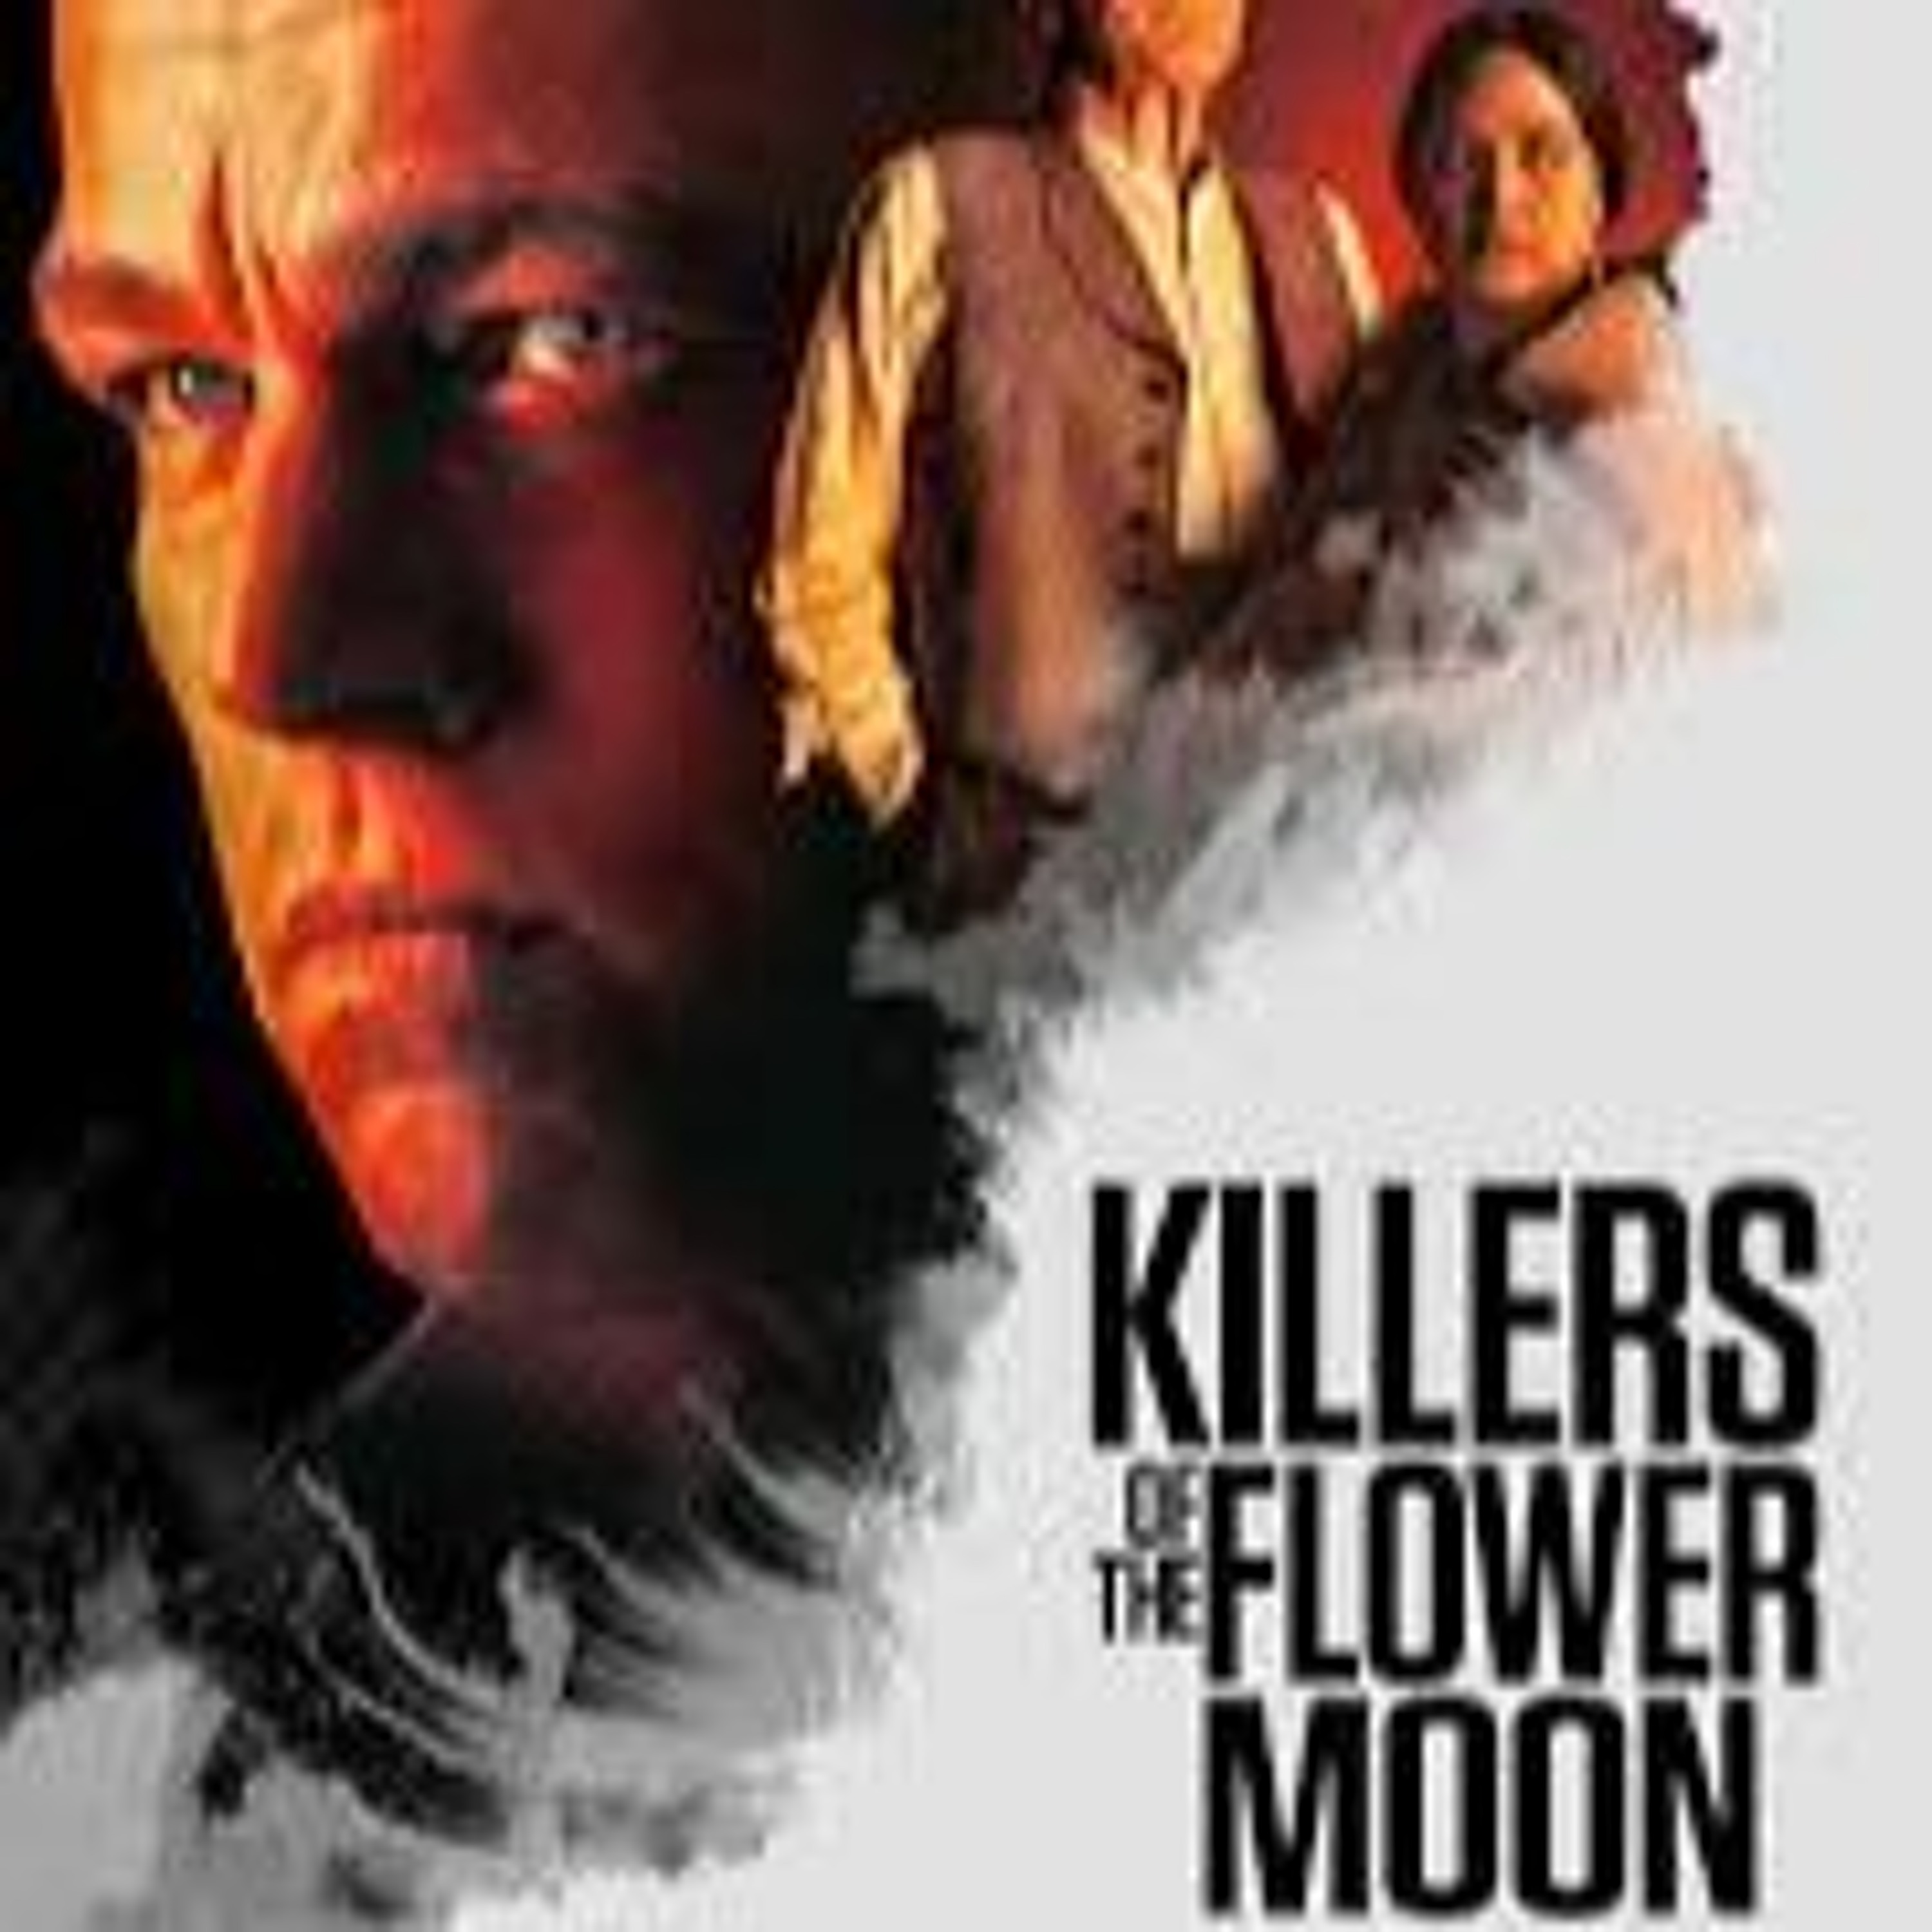 202 - Killers of the Flower Moon